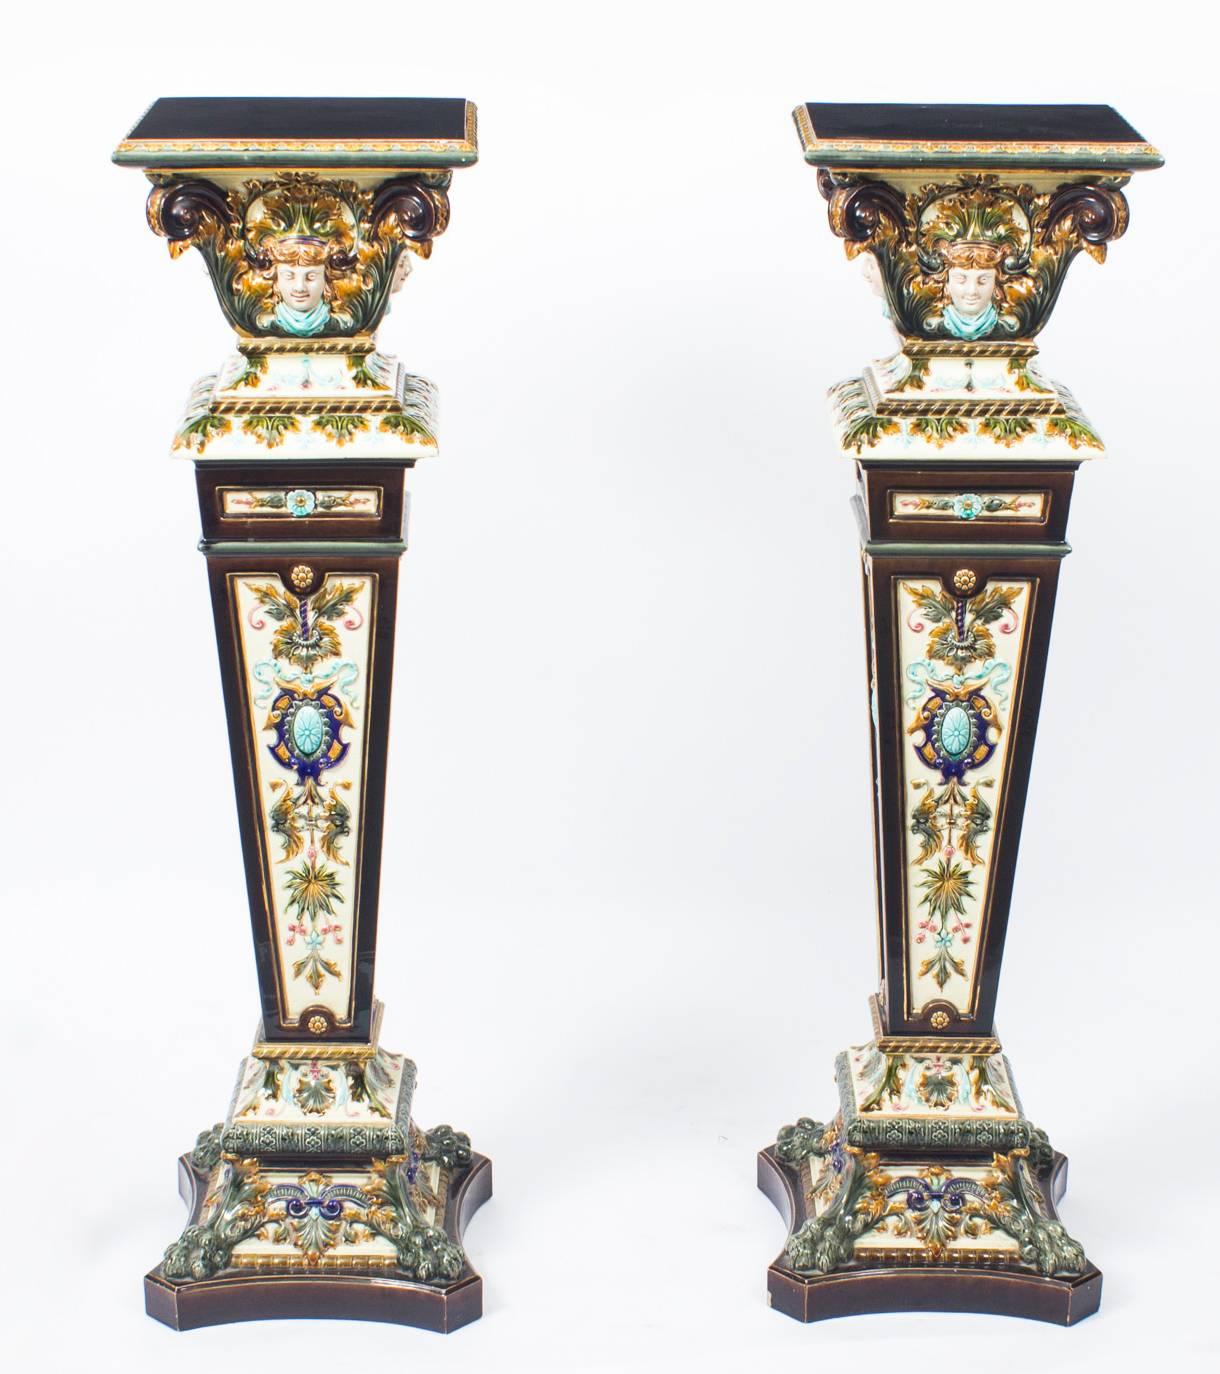 This is a gorgeous antique pair of Swedish Rorstrand majolica pedestals, late 19th century in date.

They feature richly colored decoration in green, blue, turquoise, pink and gold. The capitals are moulded with female masks with scrolls and sit